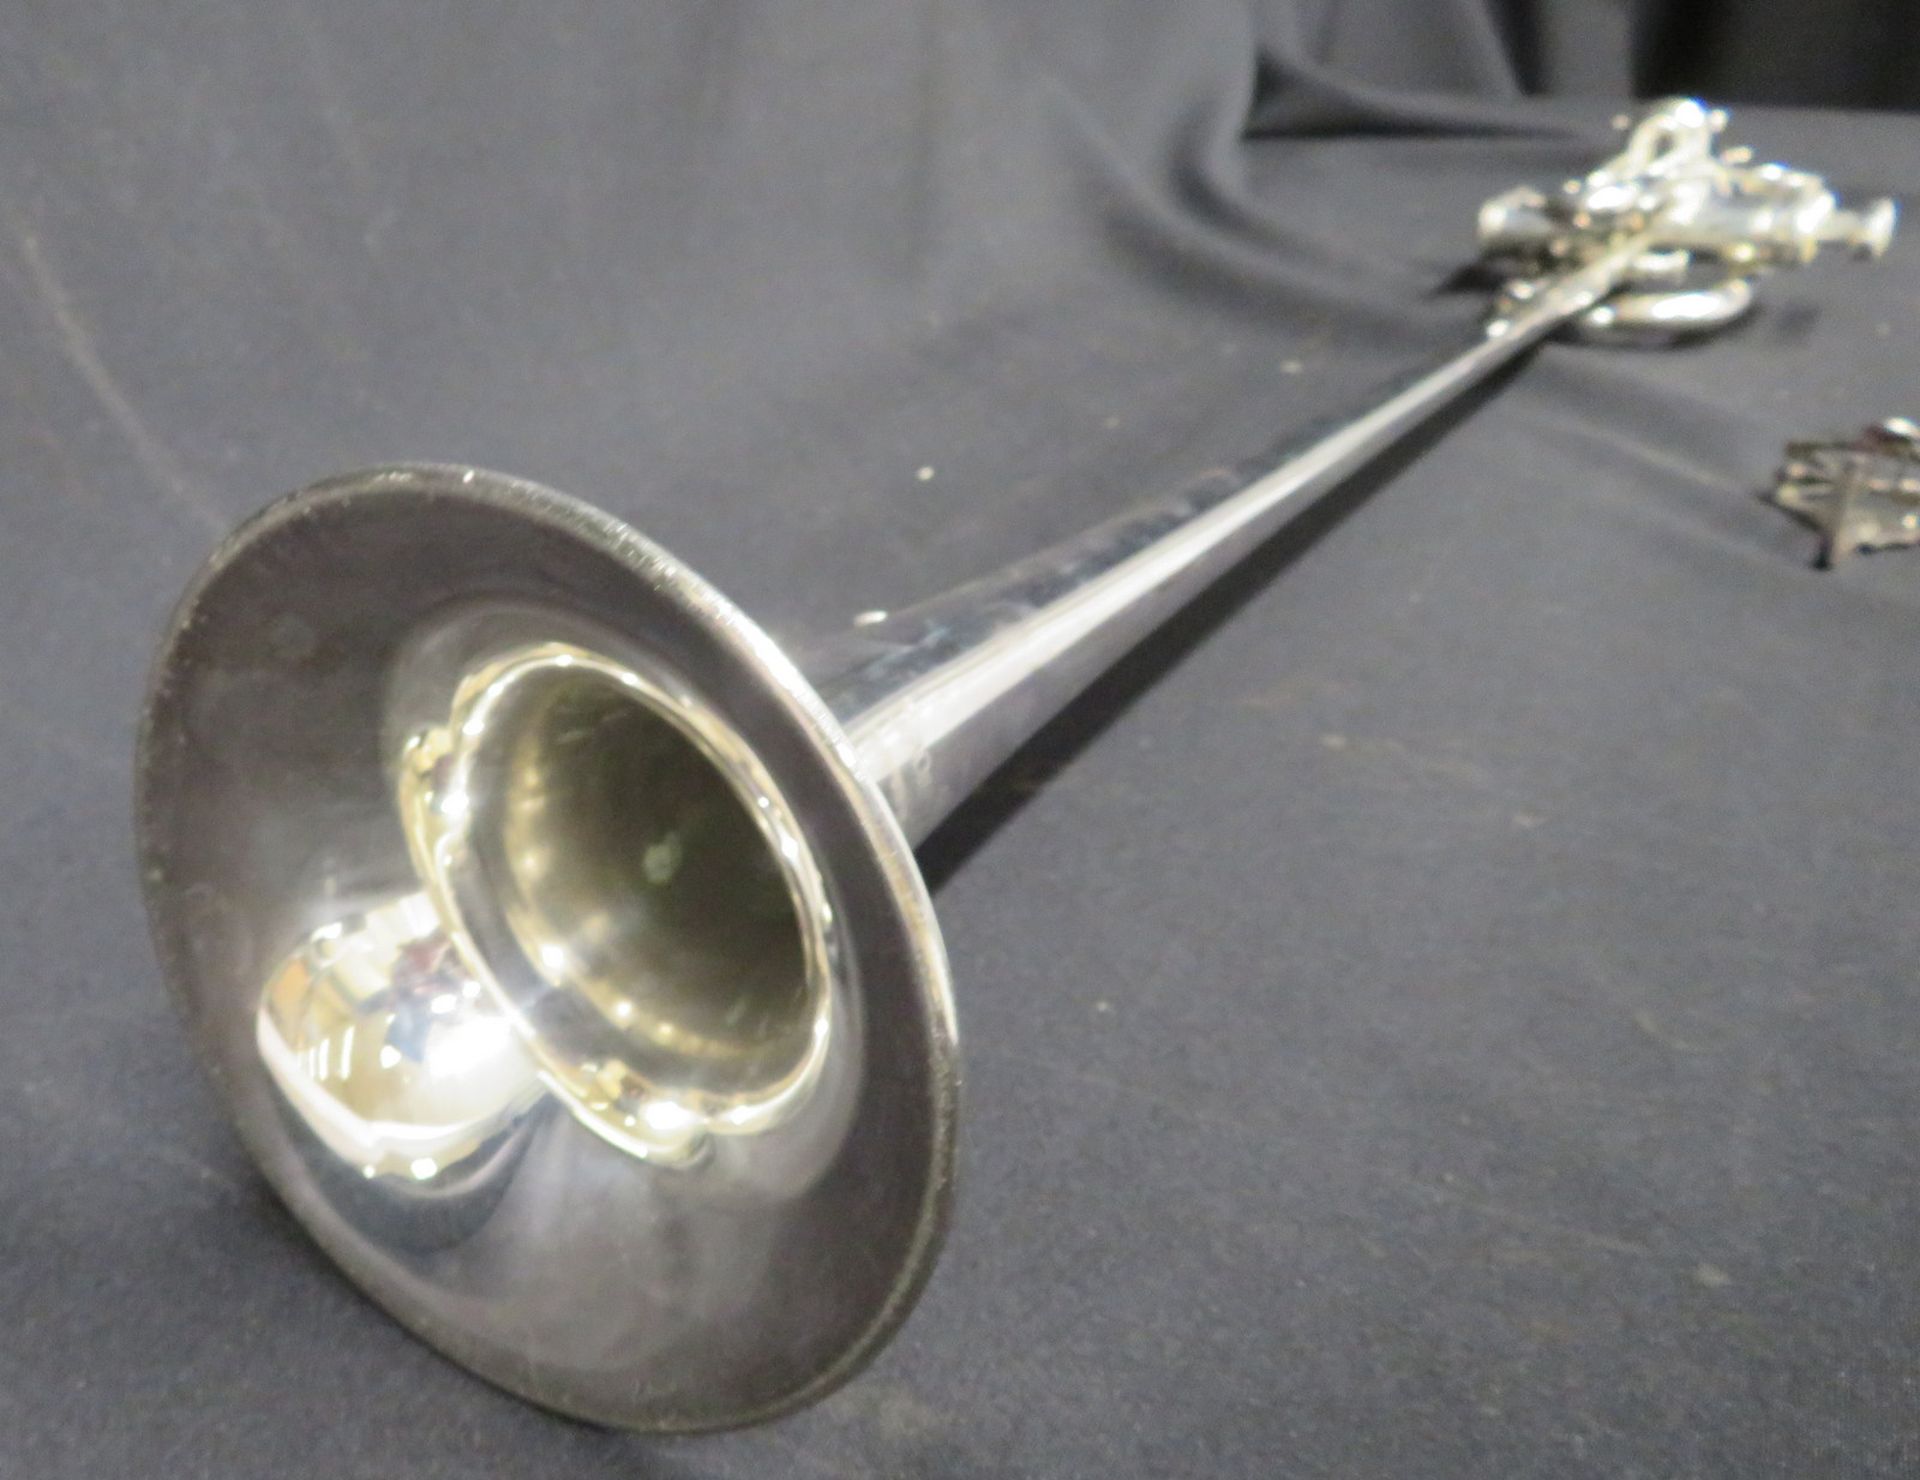 Boosey & Hawkes Imperial Besson fanfare trumpet with case. Serial number: 706-702334. - Image 10 of 16